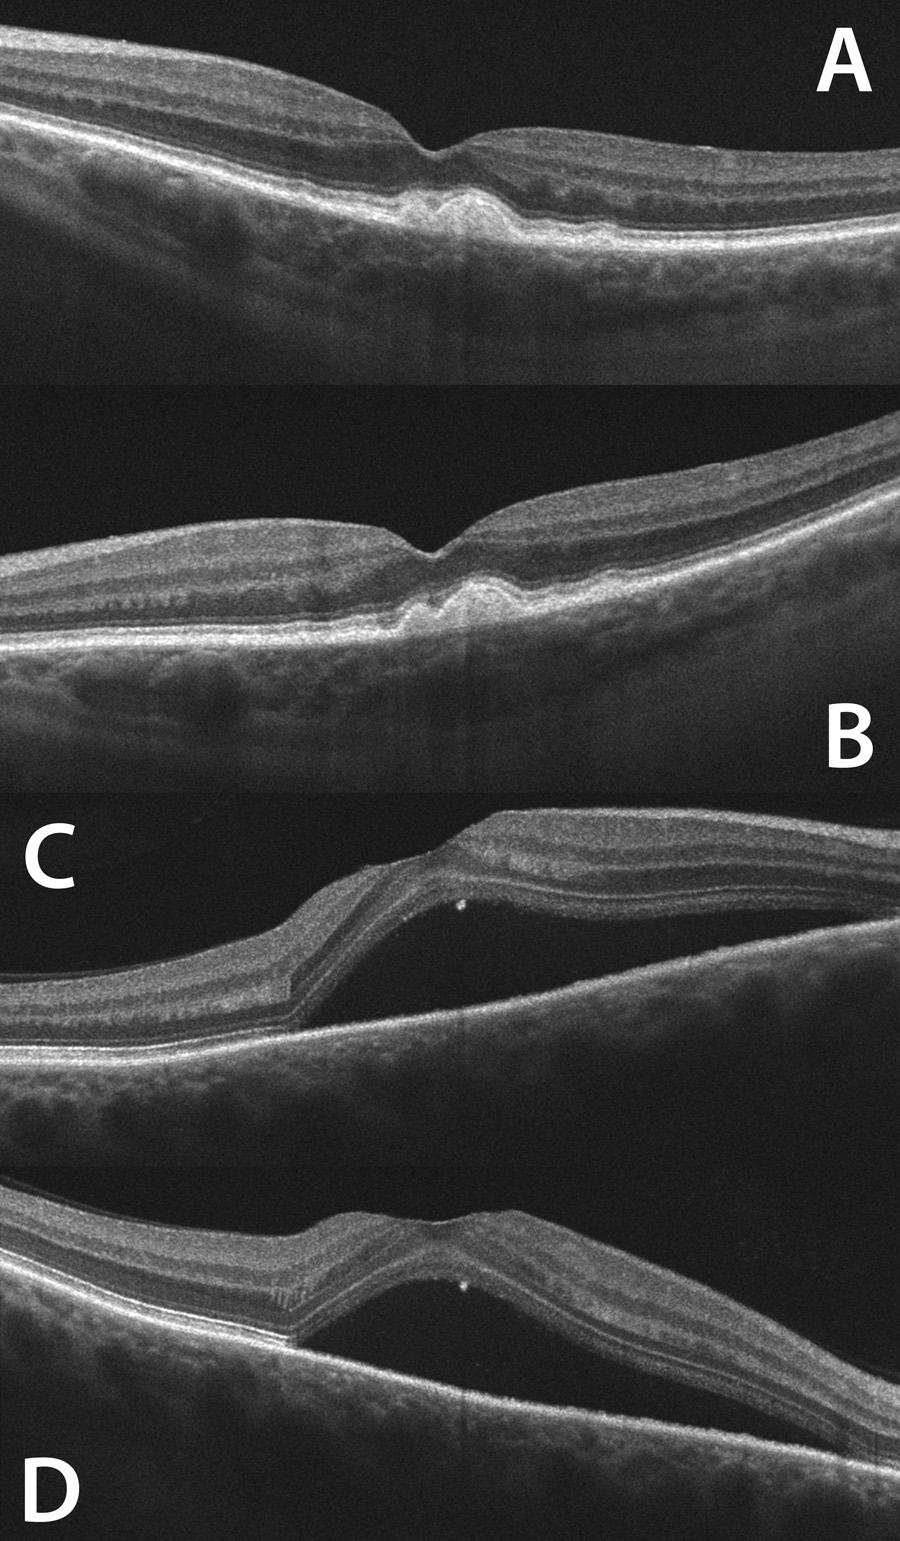 1490 Lujan et al. IOVS, March 2011, Vol. 52, No. 3 FIGURE 5. Clinical visualization of reflectivity changes in HFL. (A) Central serous chorioretinopathy.